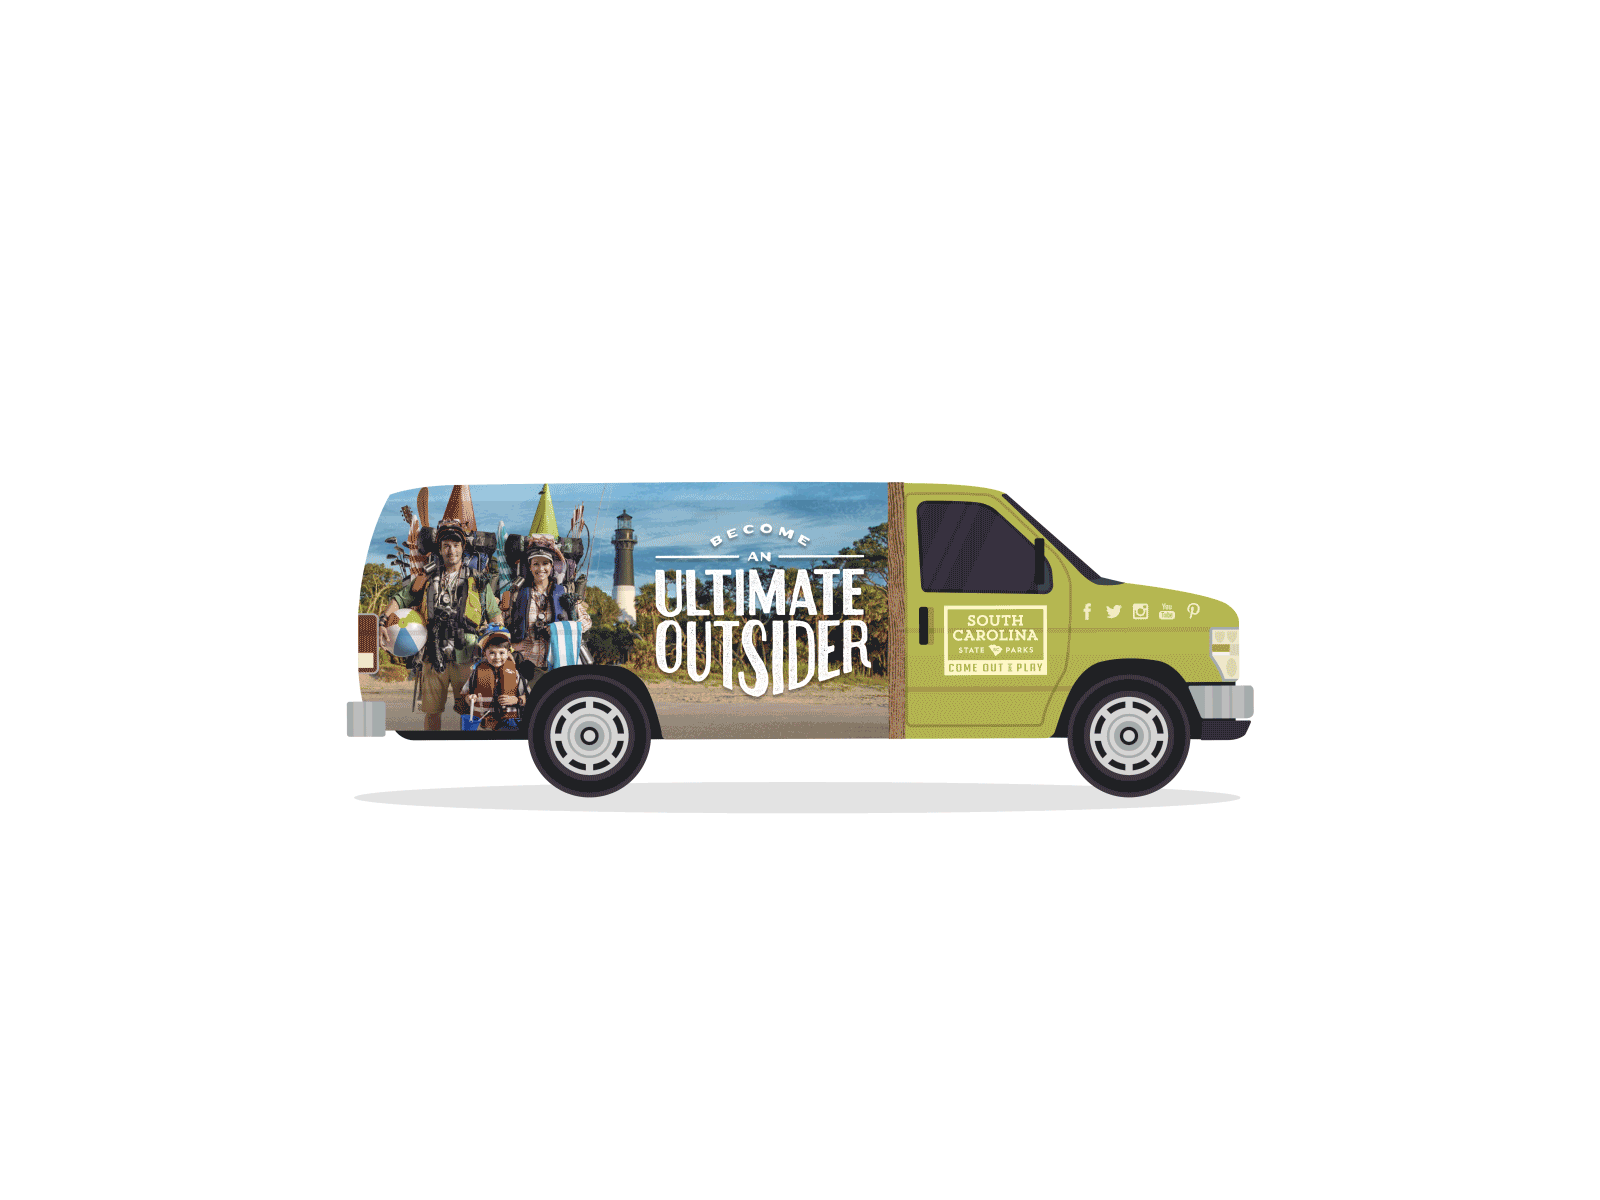 South Carolina State Park - Ultimate Outsider Van - Social Gif animated animated gif animation gif illustration loop looping nature park parks social media social media design south carolina south carolina state park story van